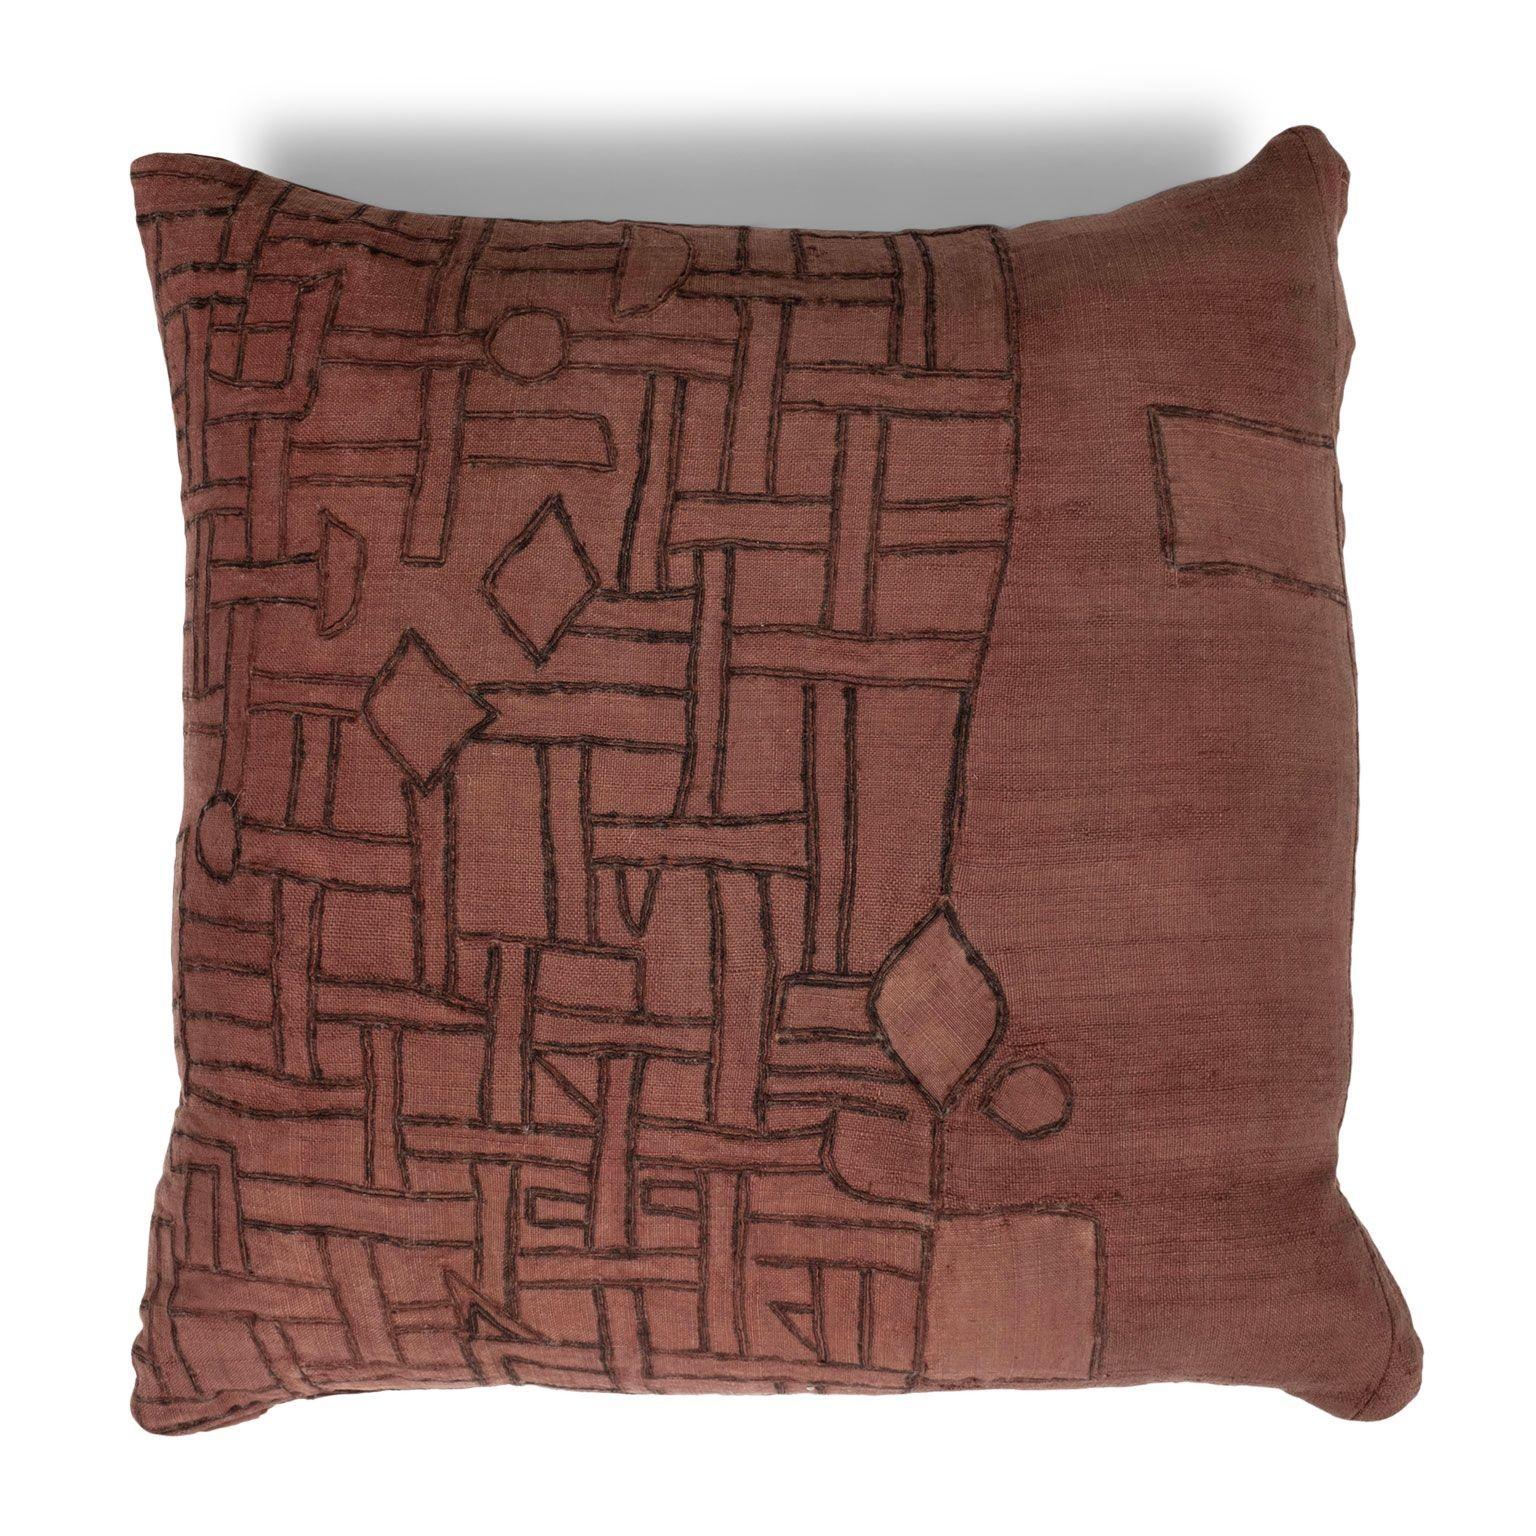 Wonderful large faded plum-color embroidered cushion made from an antique handwoven and hand-dyed cotton tribal textile (circa 1930-1954). Hand-sewn into gorgeous large square decorative pillow that includes a zip fastener and feather insert. Two